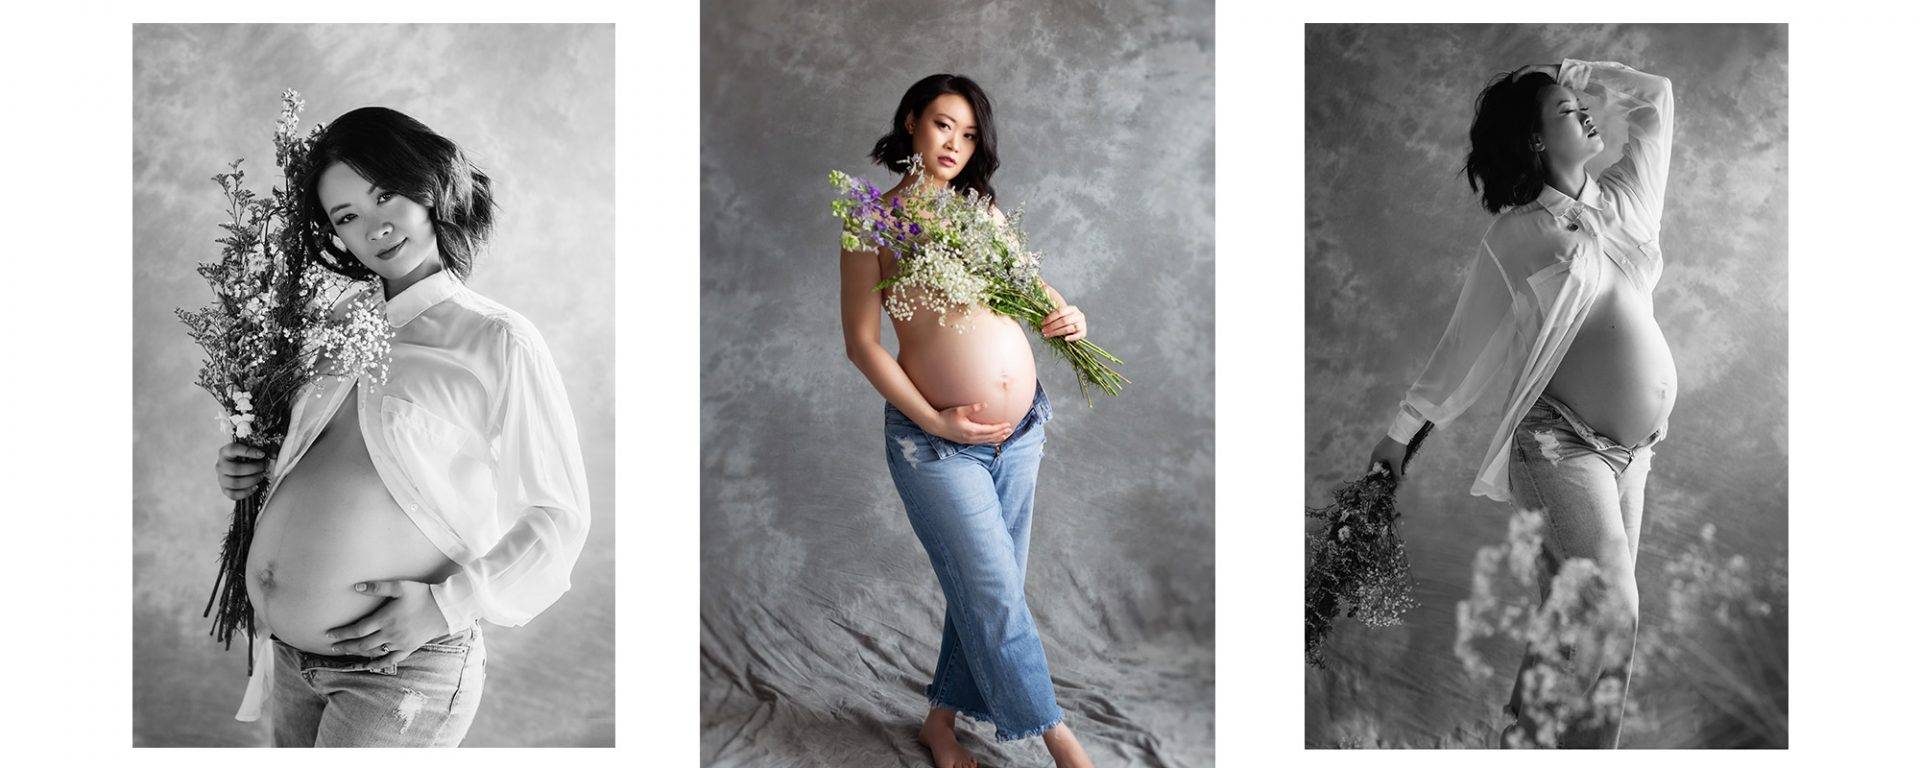 Pregnancy photos with jeans and flowers.